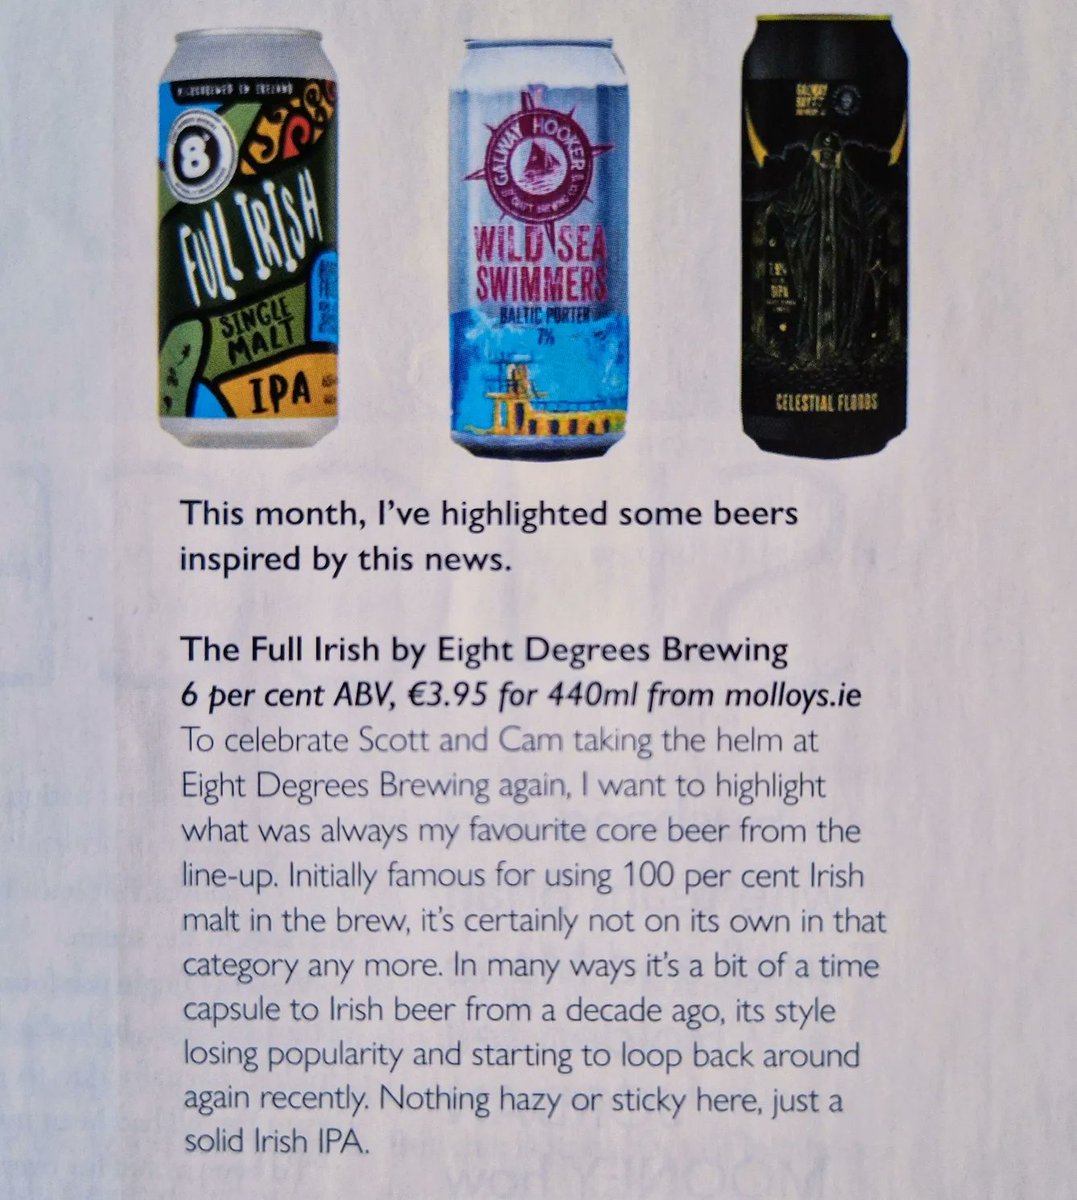 Thanks to Dean Carroll for featuring #FullIrishIPA - which celebrates its 10th birthday this Easter! - in @foodandwineIE alongside fellow early adopters in the #irishmicrobrewery world @galwaybeer & @HookerBrewery. 

Find #foodandwineireland in today's @businessposthq.